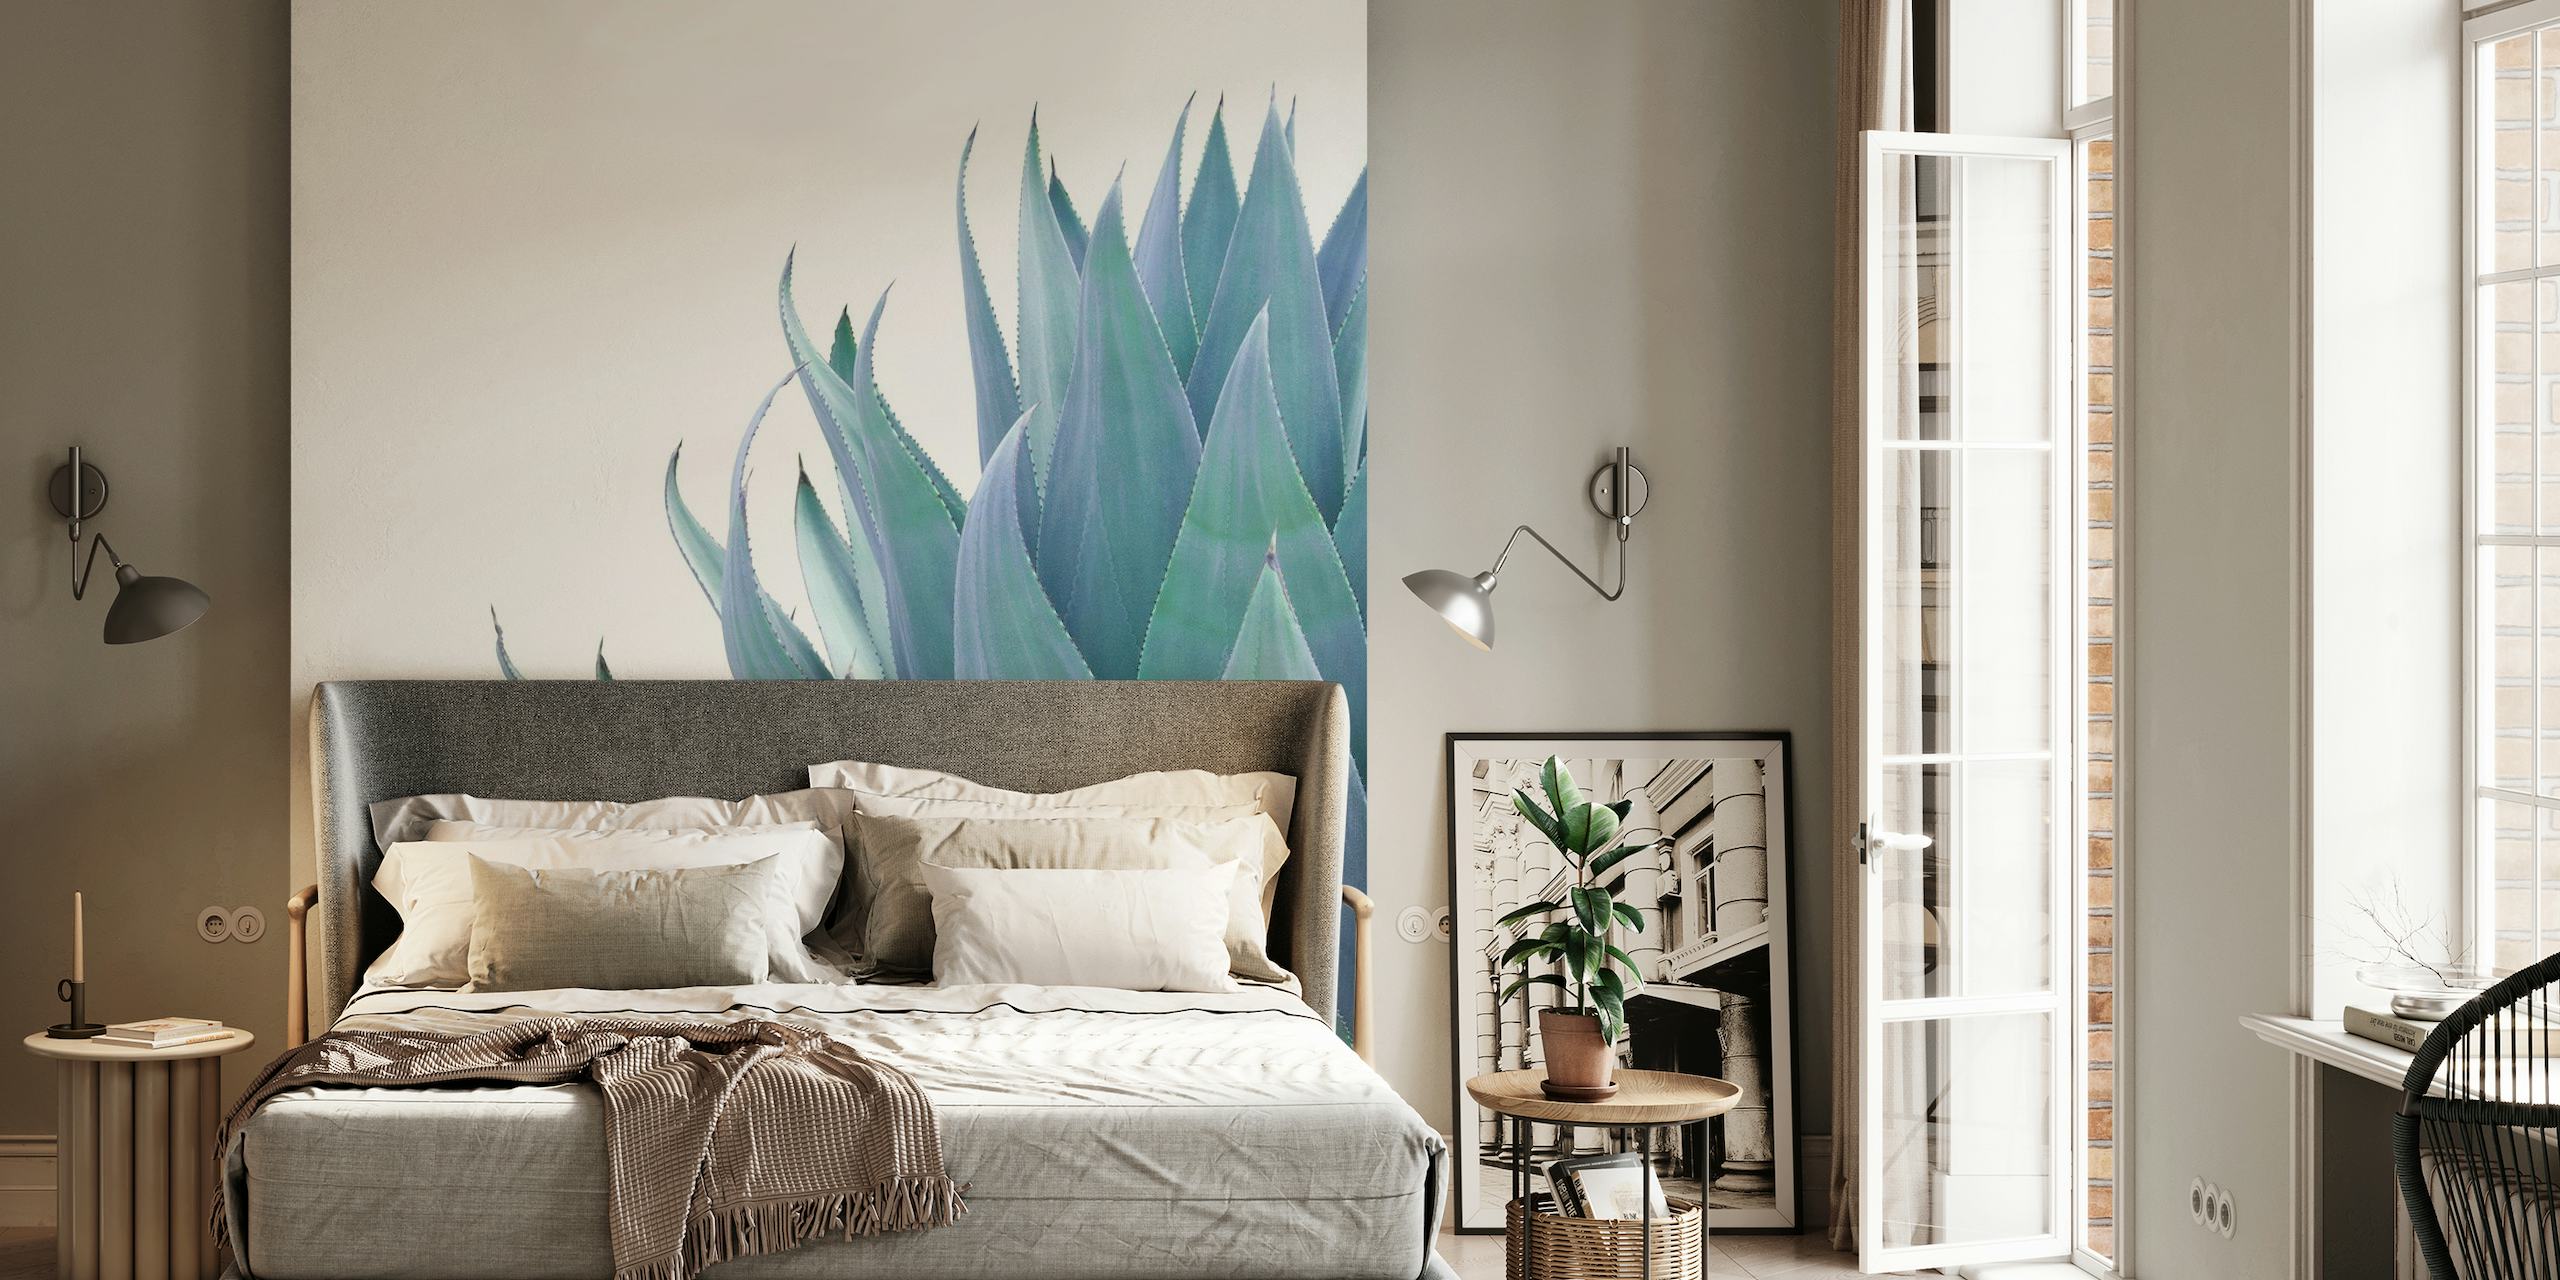 Minimalistic agave plant wall mural with blue-green tones